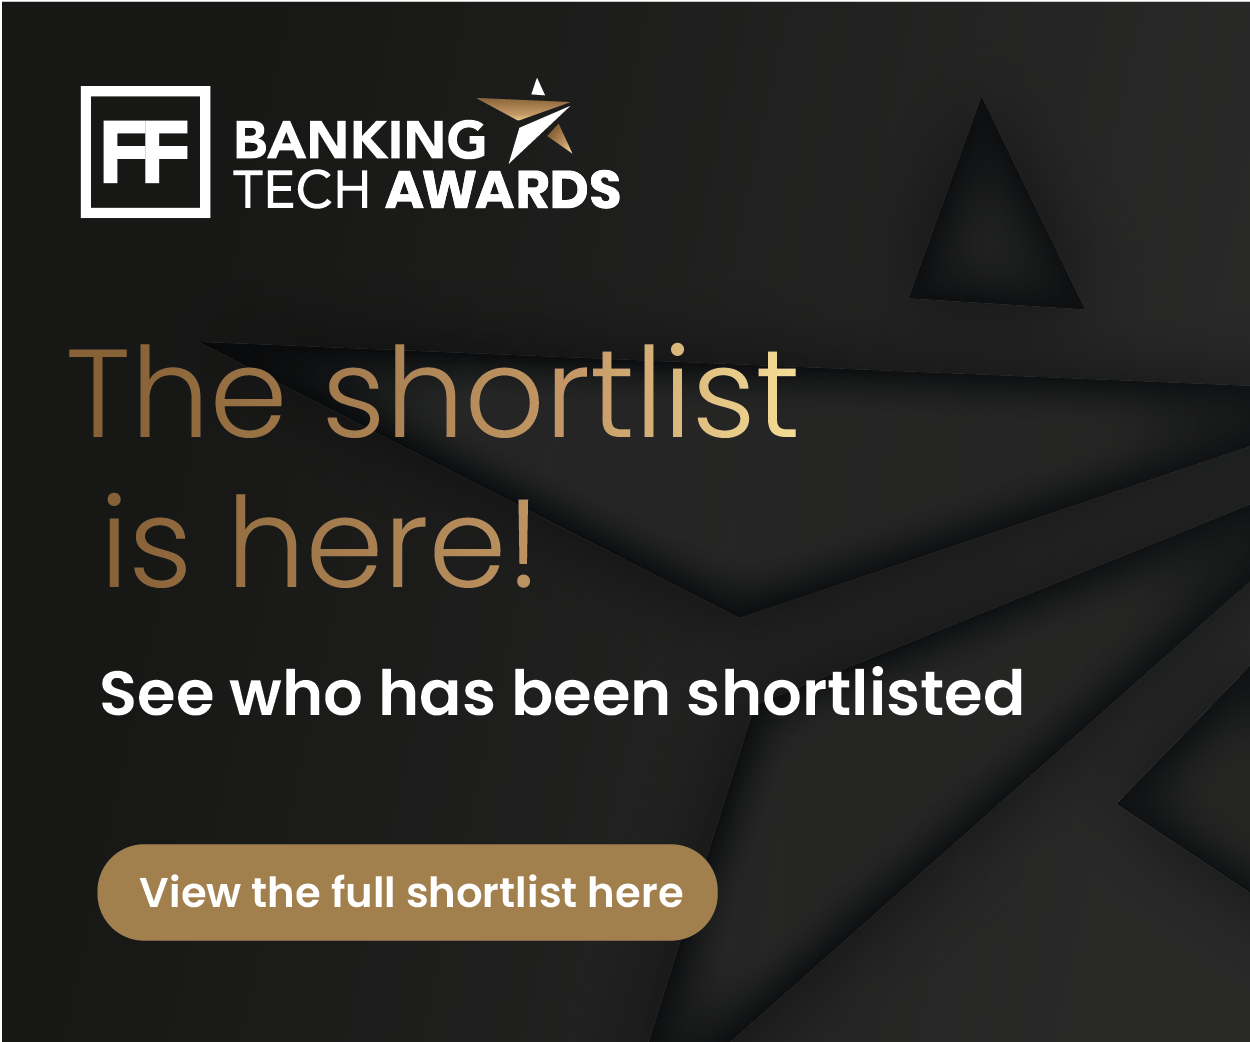 Finalists announced for Banking Tech Awards 2022